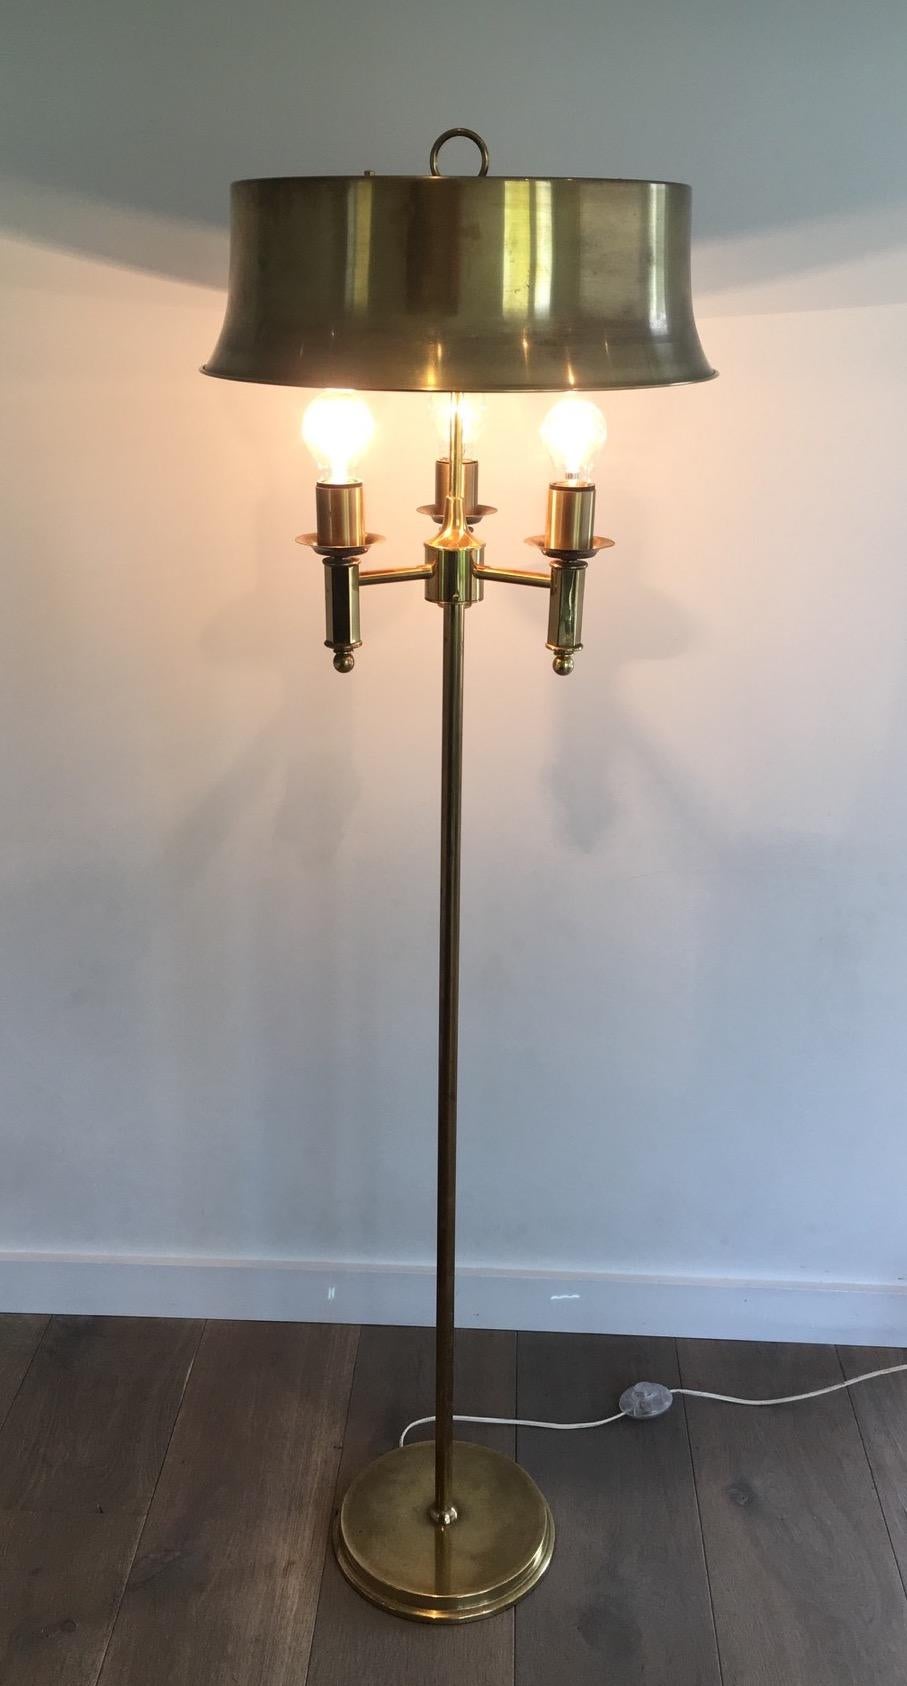 This floor lamp is all made of bronze and brass, including its shade which is made of brass. There is a circle space on the top of the shade which shows a light's circle when the light is on. The quality of this lamp is very good. This is a French